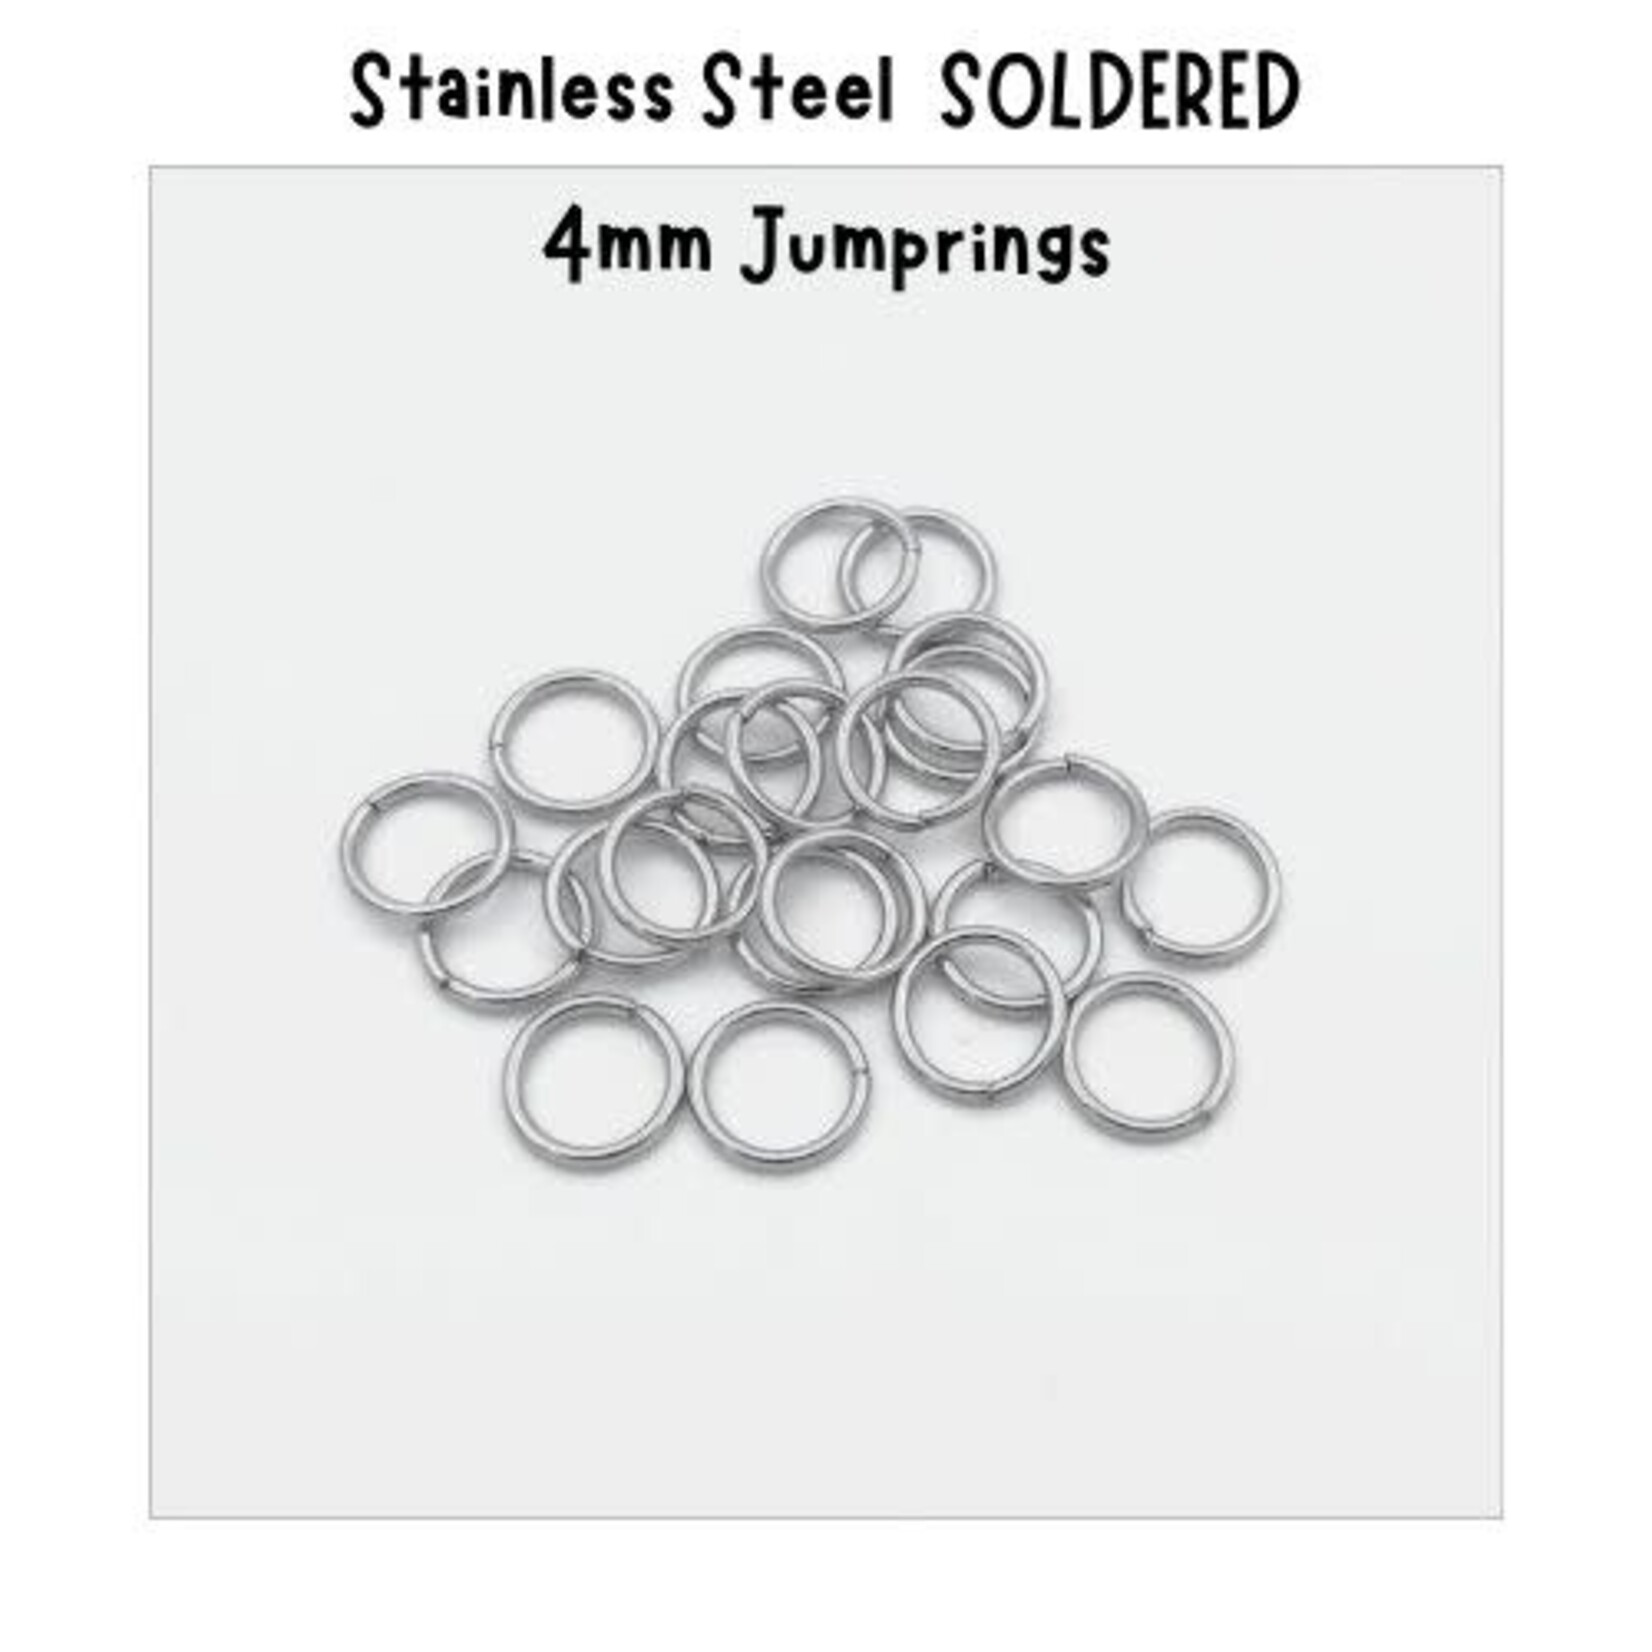 4mm Stainless Steel SOLDERED Jumprings, approx 50pcs, 21 guage, 6x0.8mm, 2gms/0.07oz